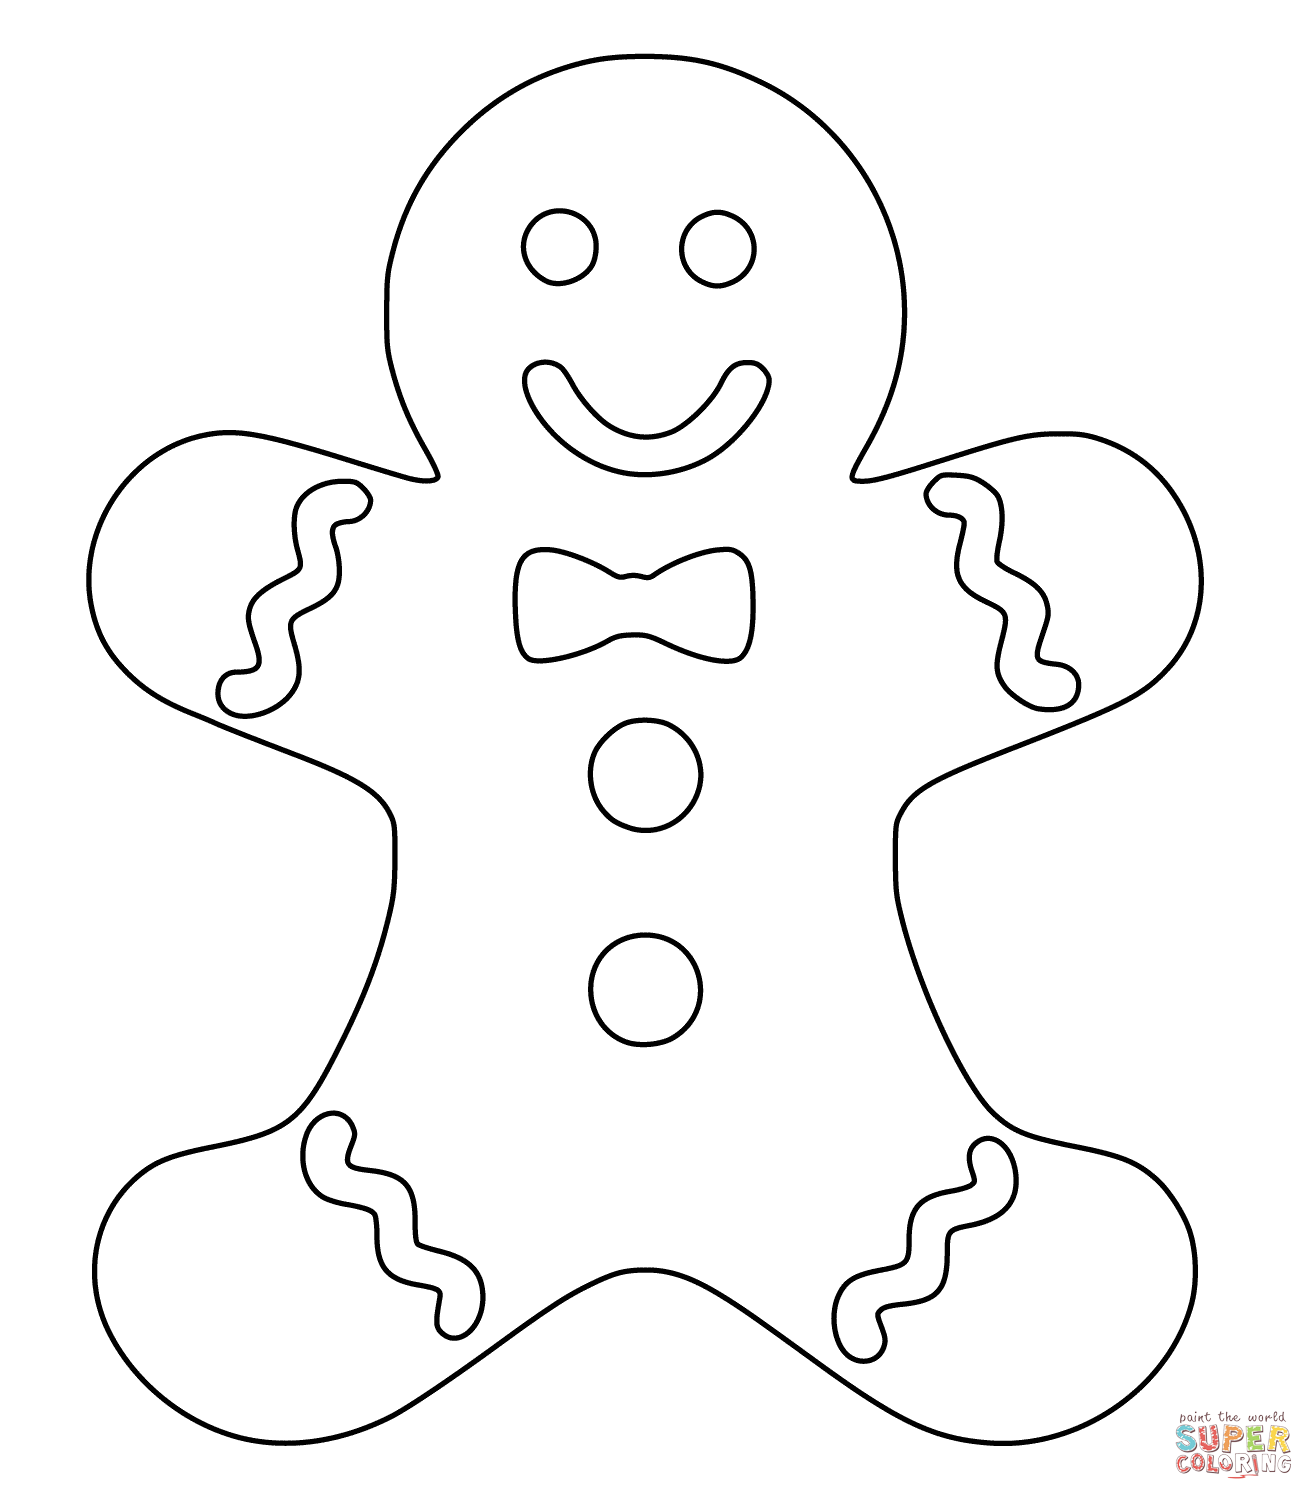 Christmas Gingerbread Man coloring page | Free Printable Coloring